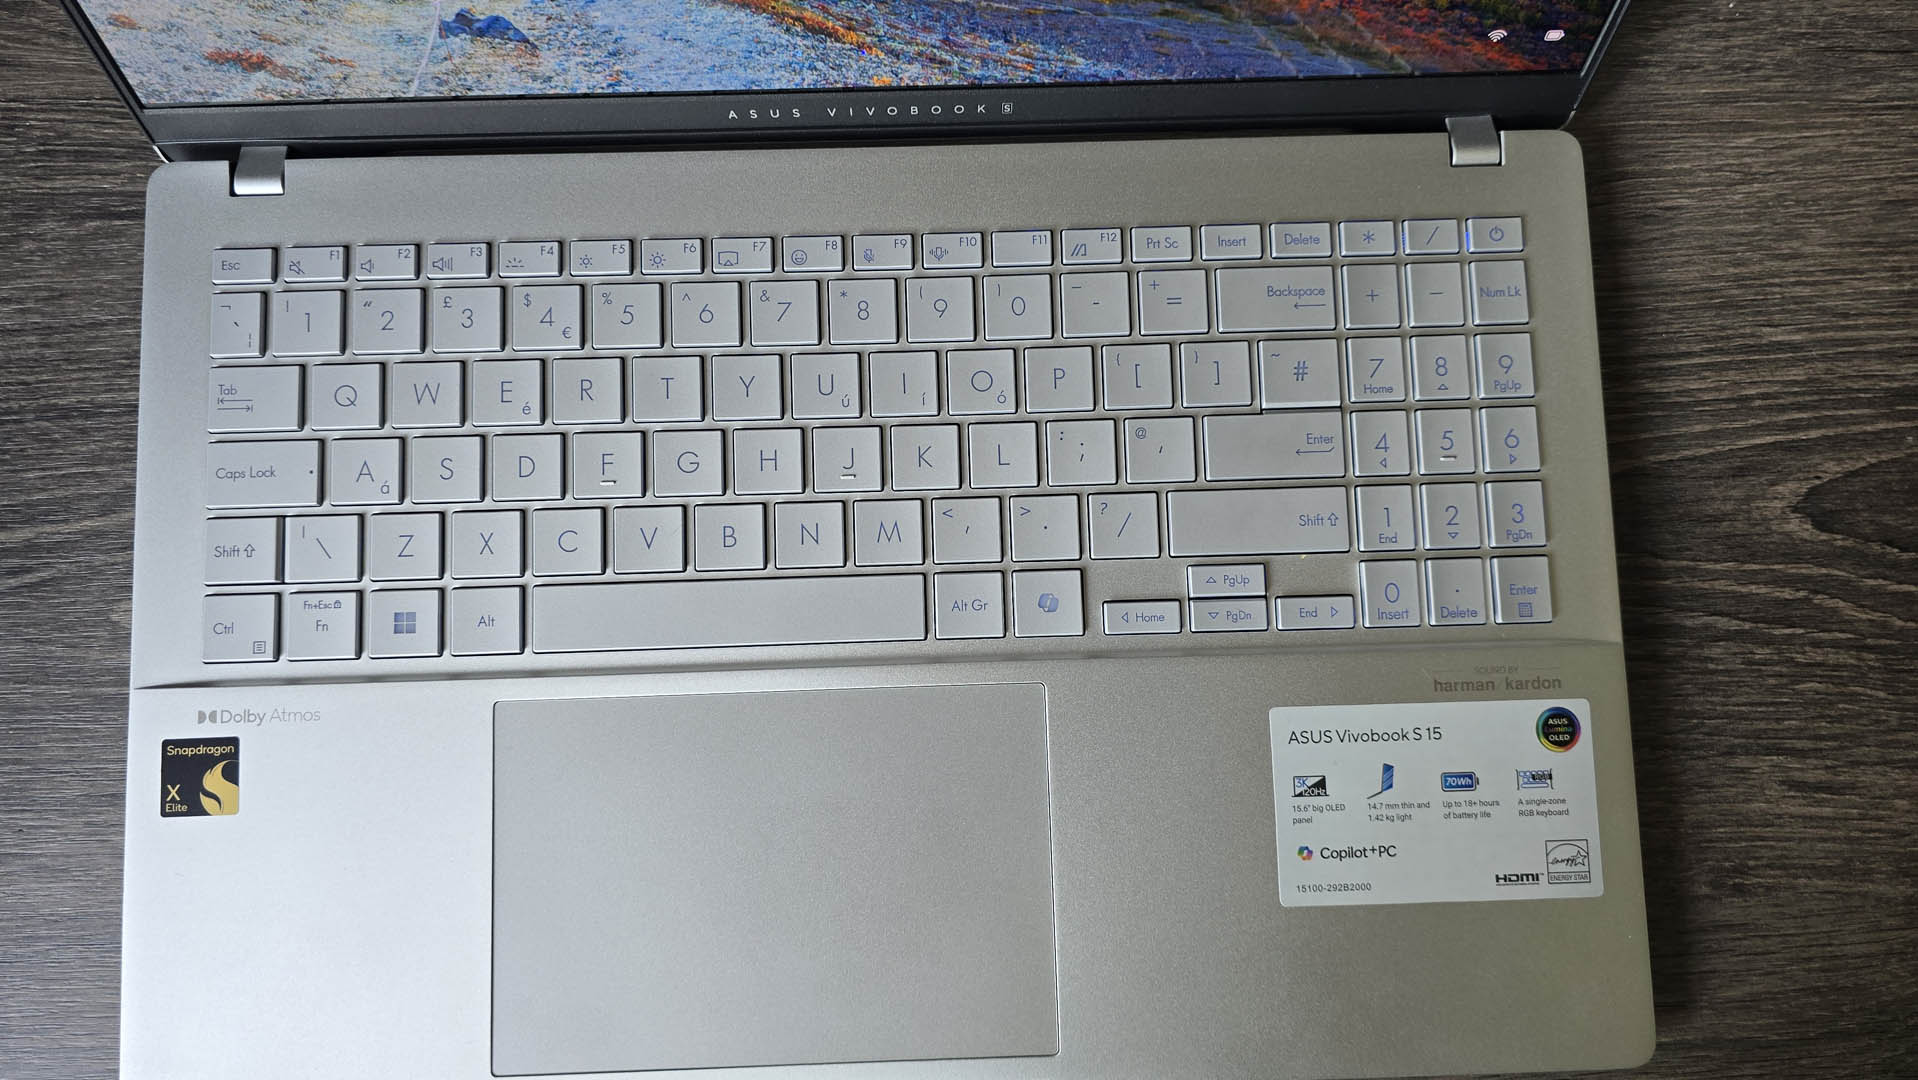 The Asus Vivobook S 15 Copilot+ in silver pictured on a wooden desk.